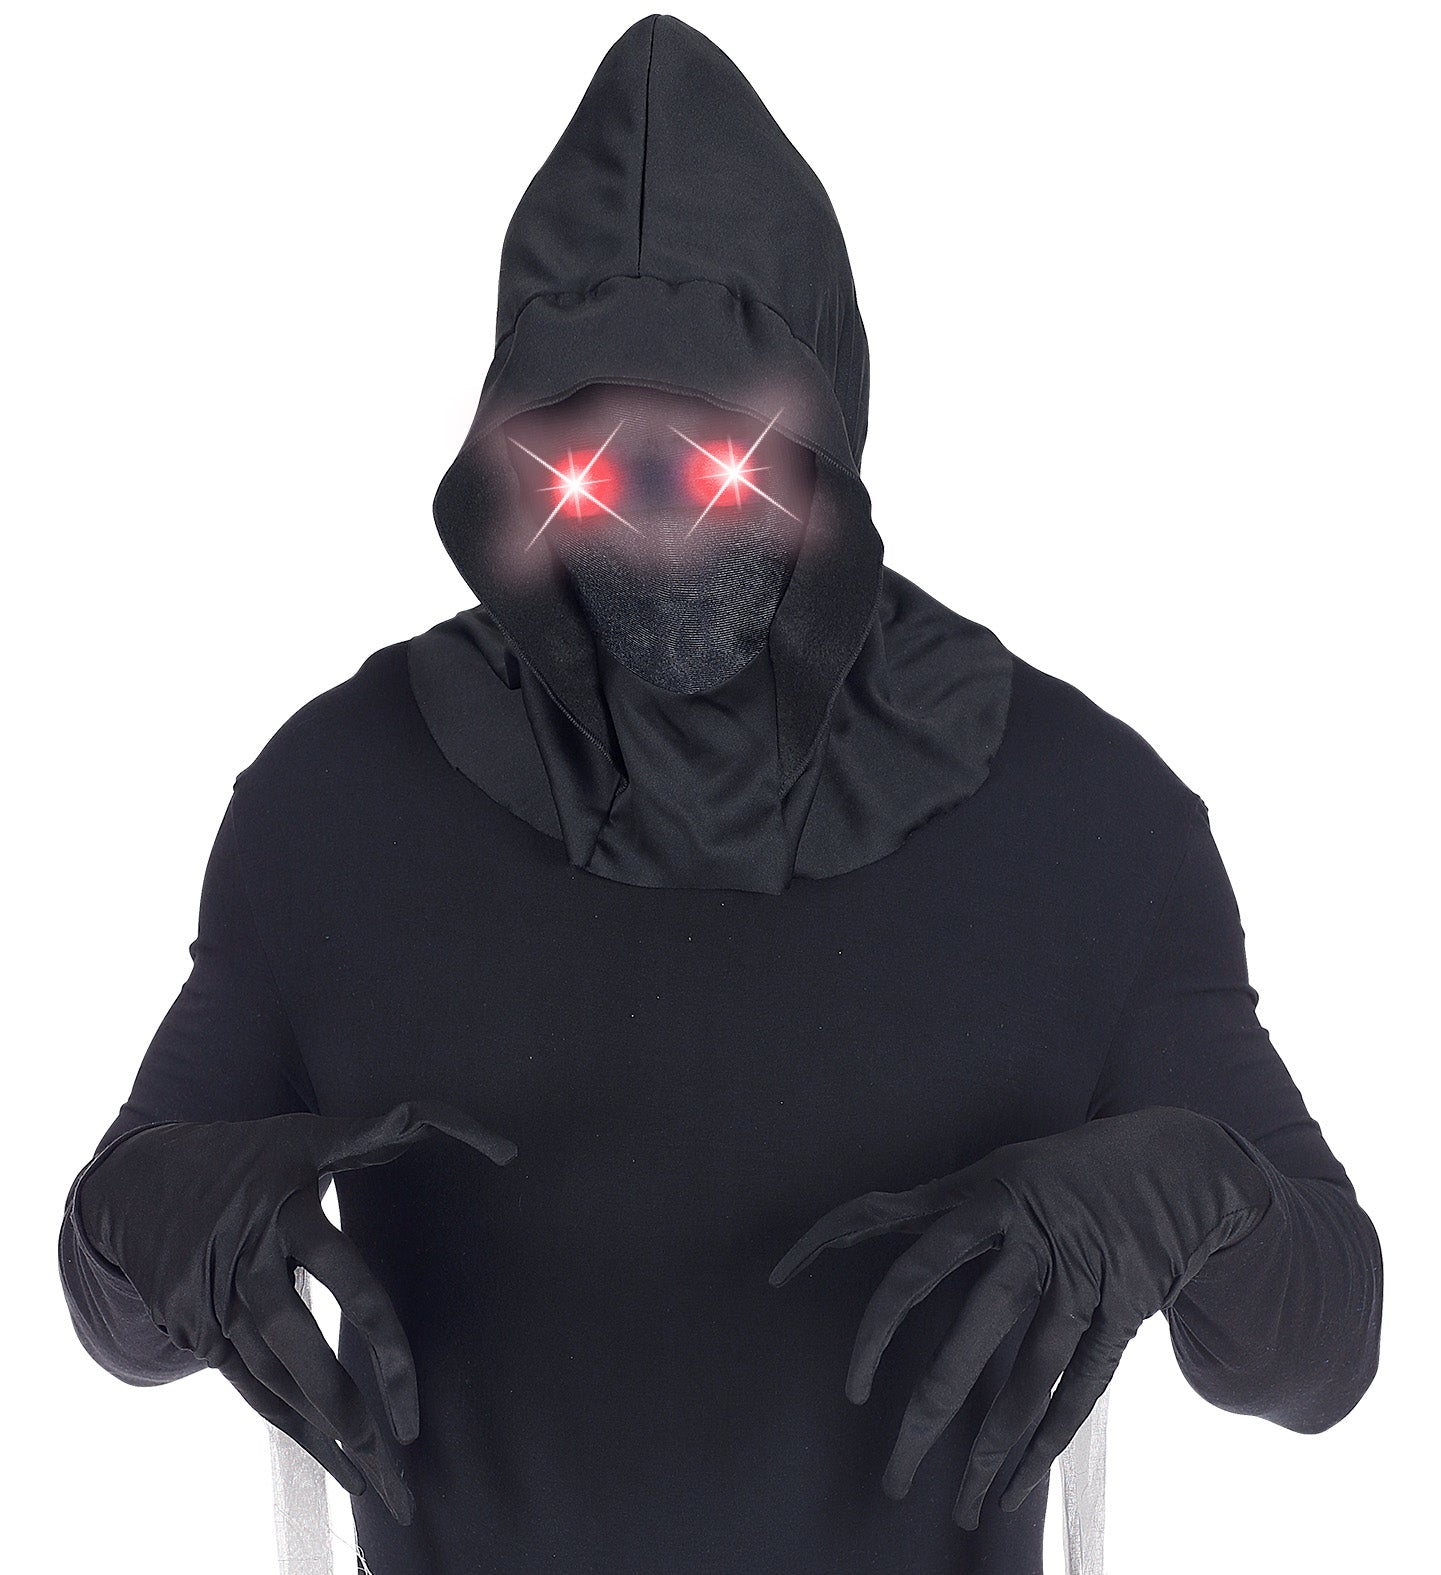 Hooded Faceless Mask with Red Light Up Eyes Halloween costume accessory